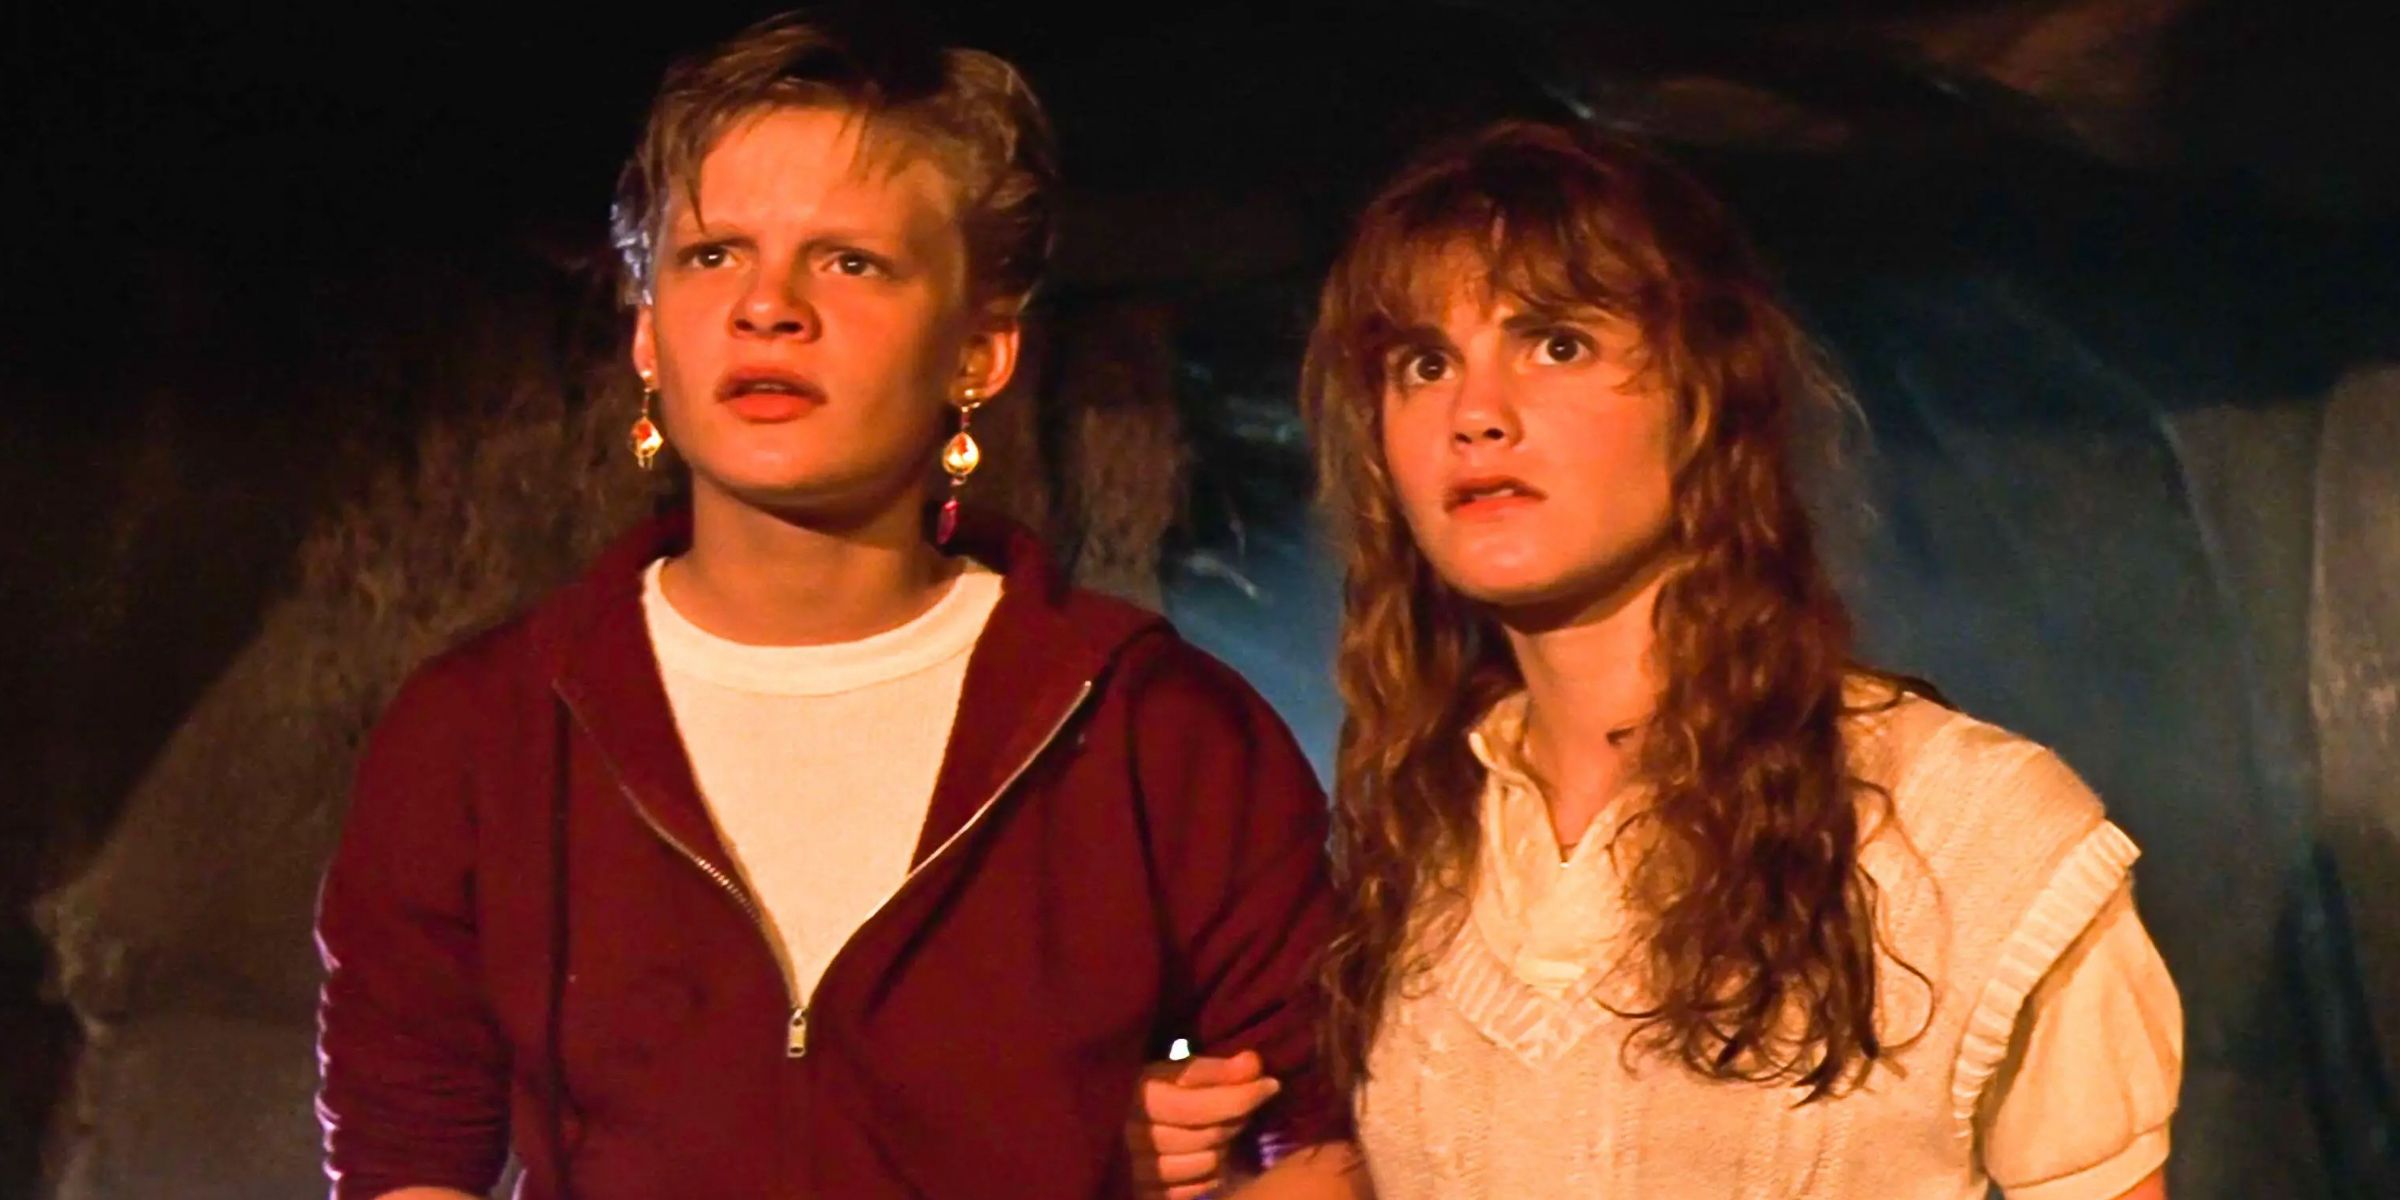 Stef and Andy appear worried in The Goonies